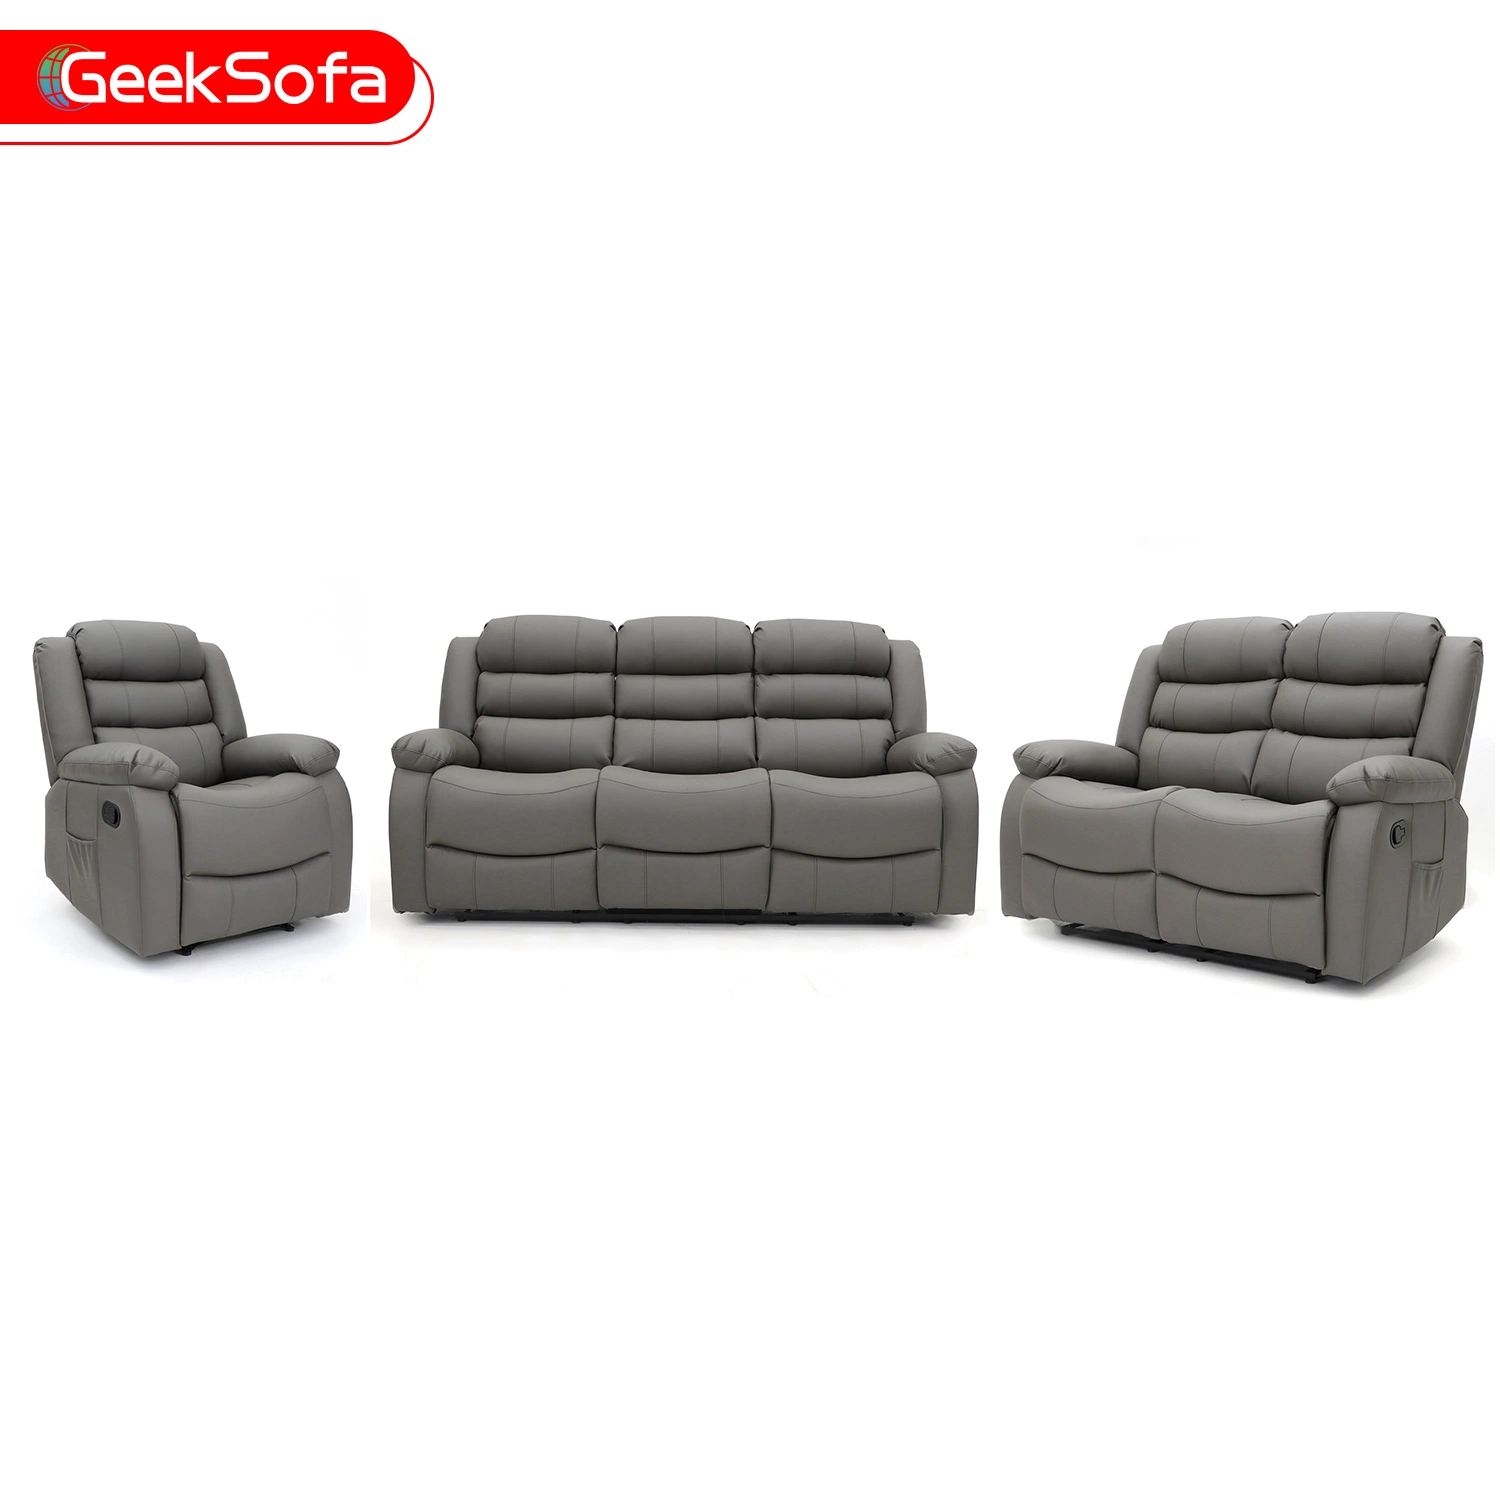 Geeksofa 3+2+1 Modern Leather Motion Recliner Sofa Set with Massage and Heat for Living Room Furniture